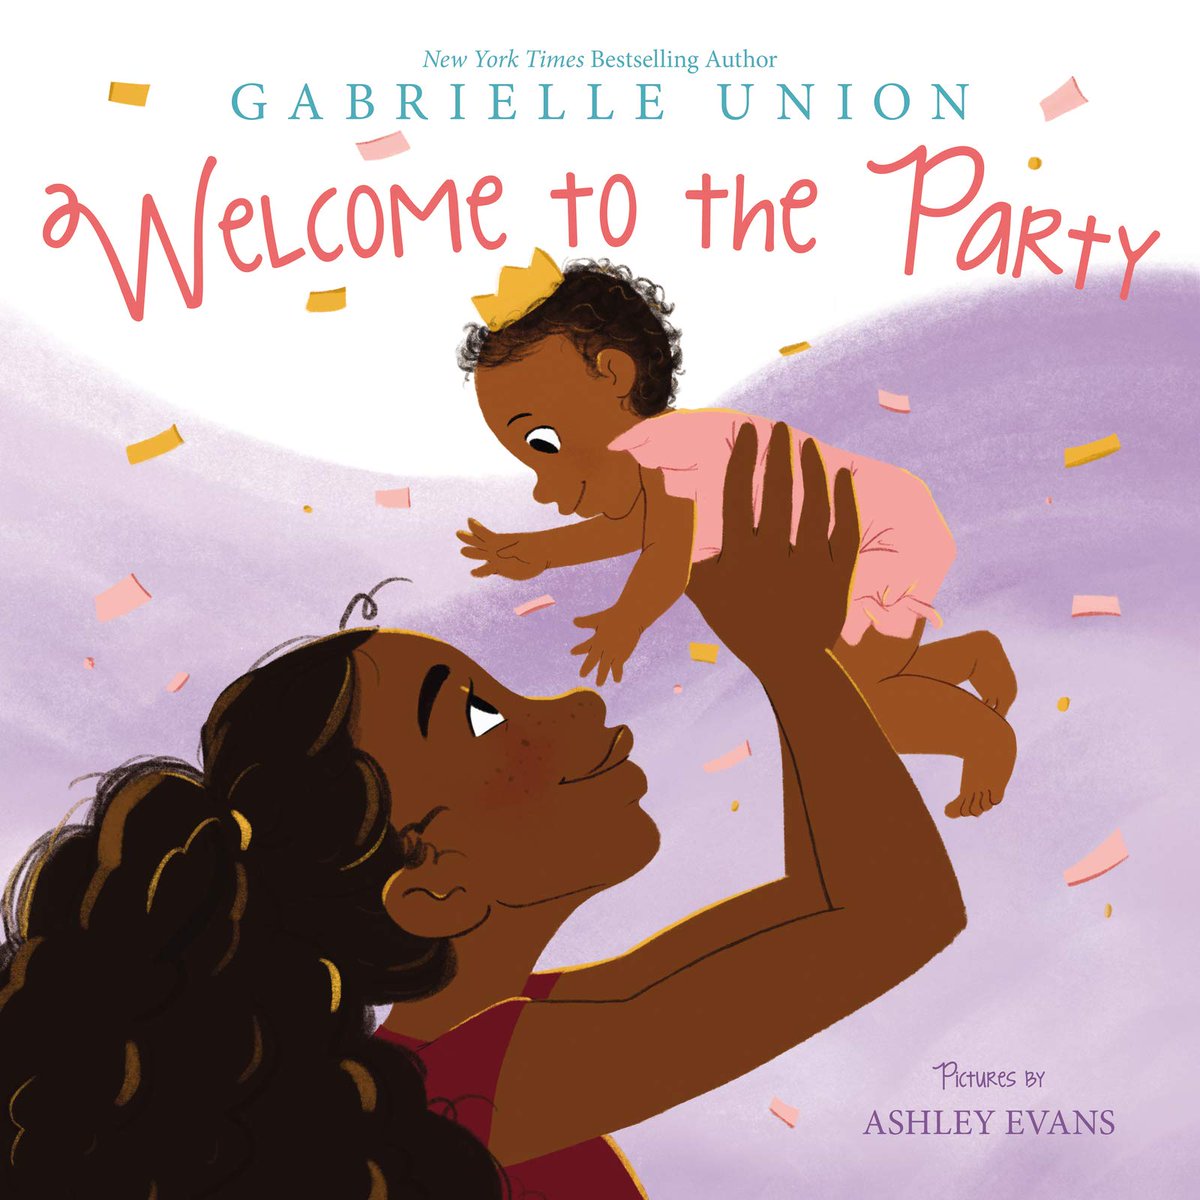 This heartfelt story by  @itsgabrielleu and touching pictures by  @aj_mcfly is considered "...a sweet love letter for parents everywhere who are excited to welcome their bundle of joy to the party that is life."Come on in and join the celebration with this book!